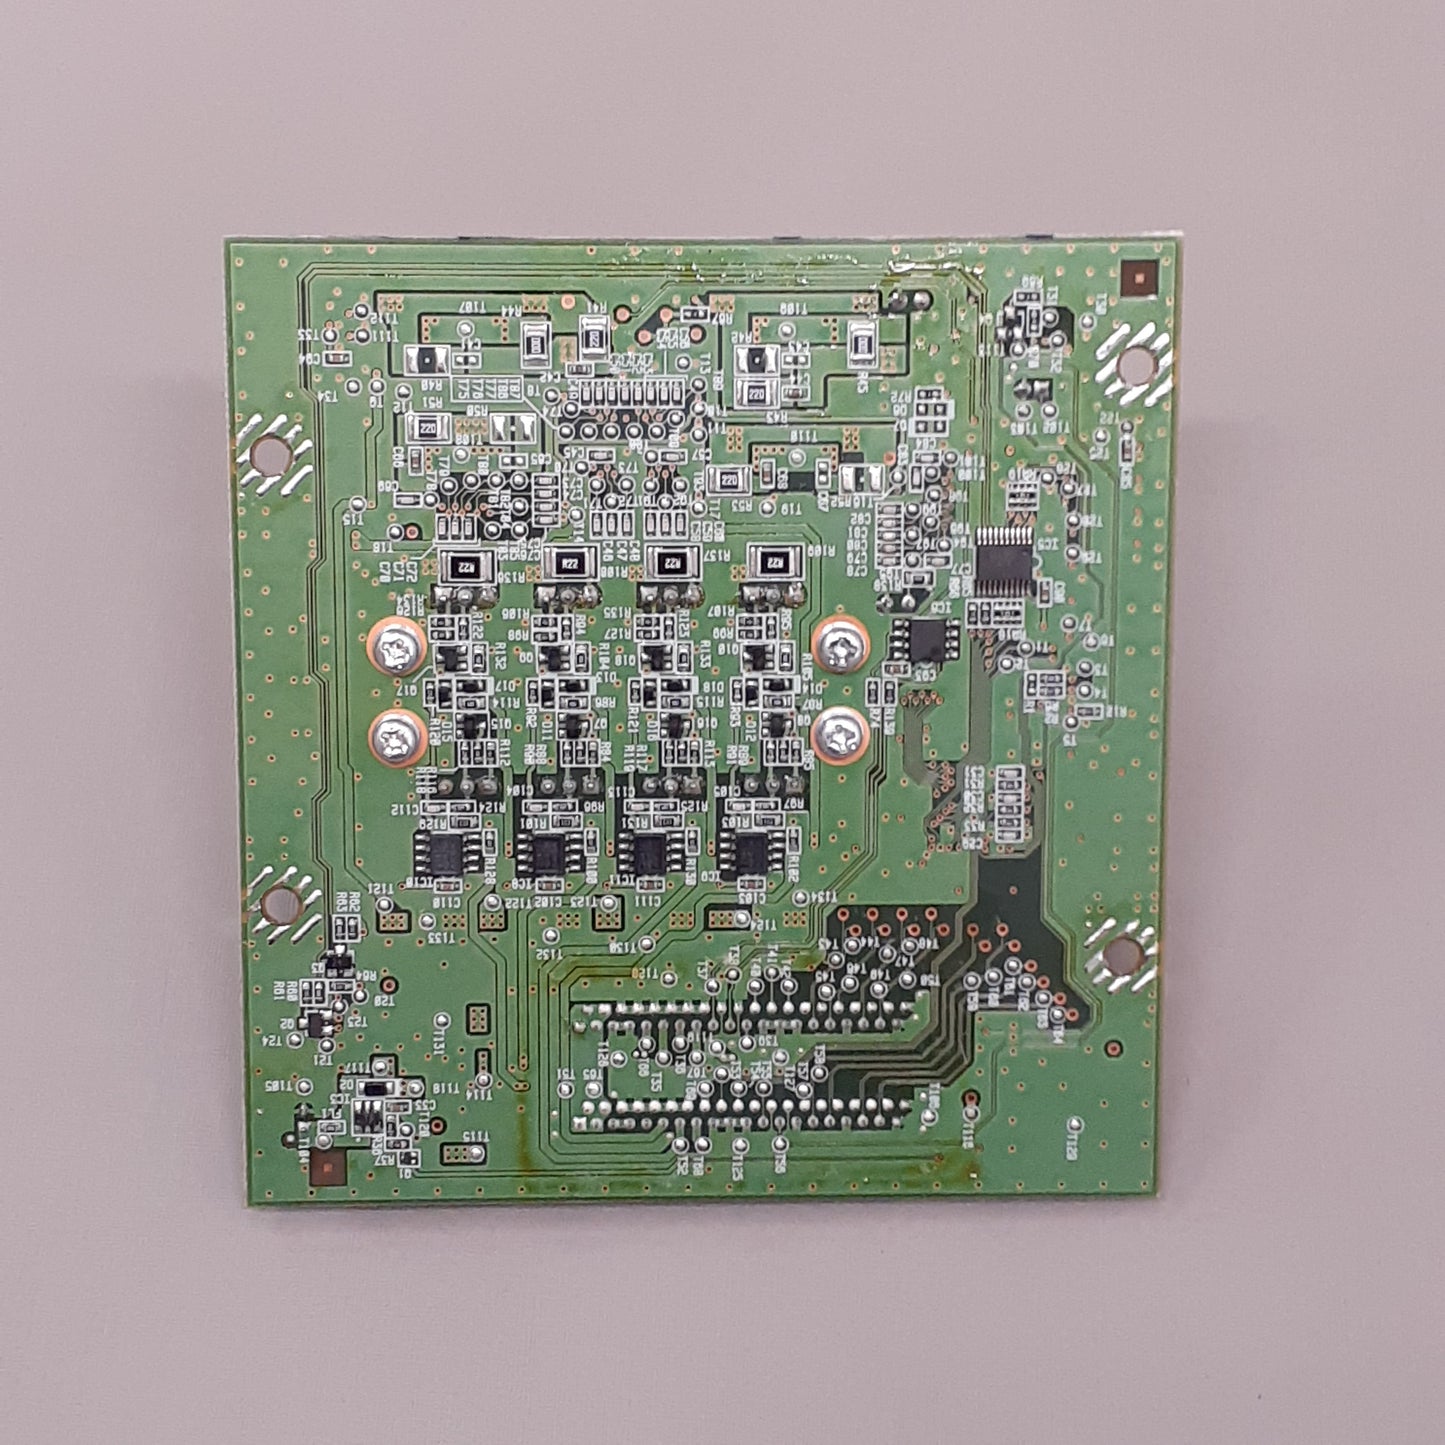 ROLAND SG-540 ASSY, Print Carriage Board (New)